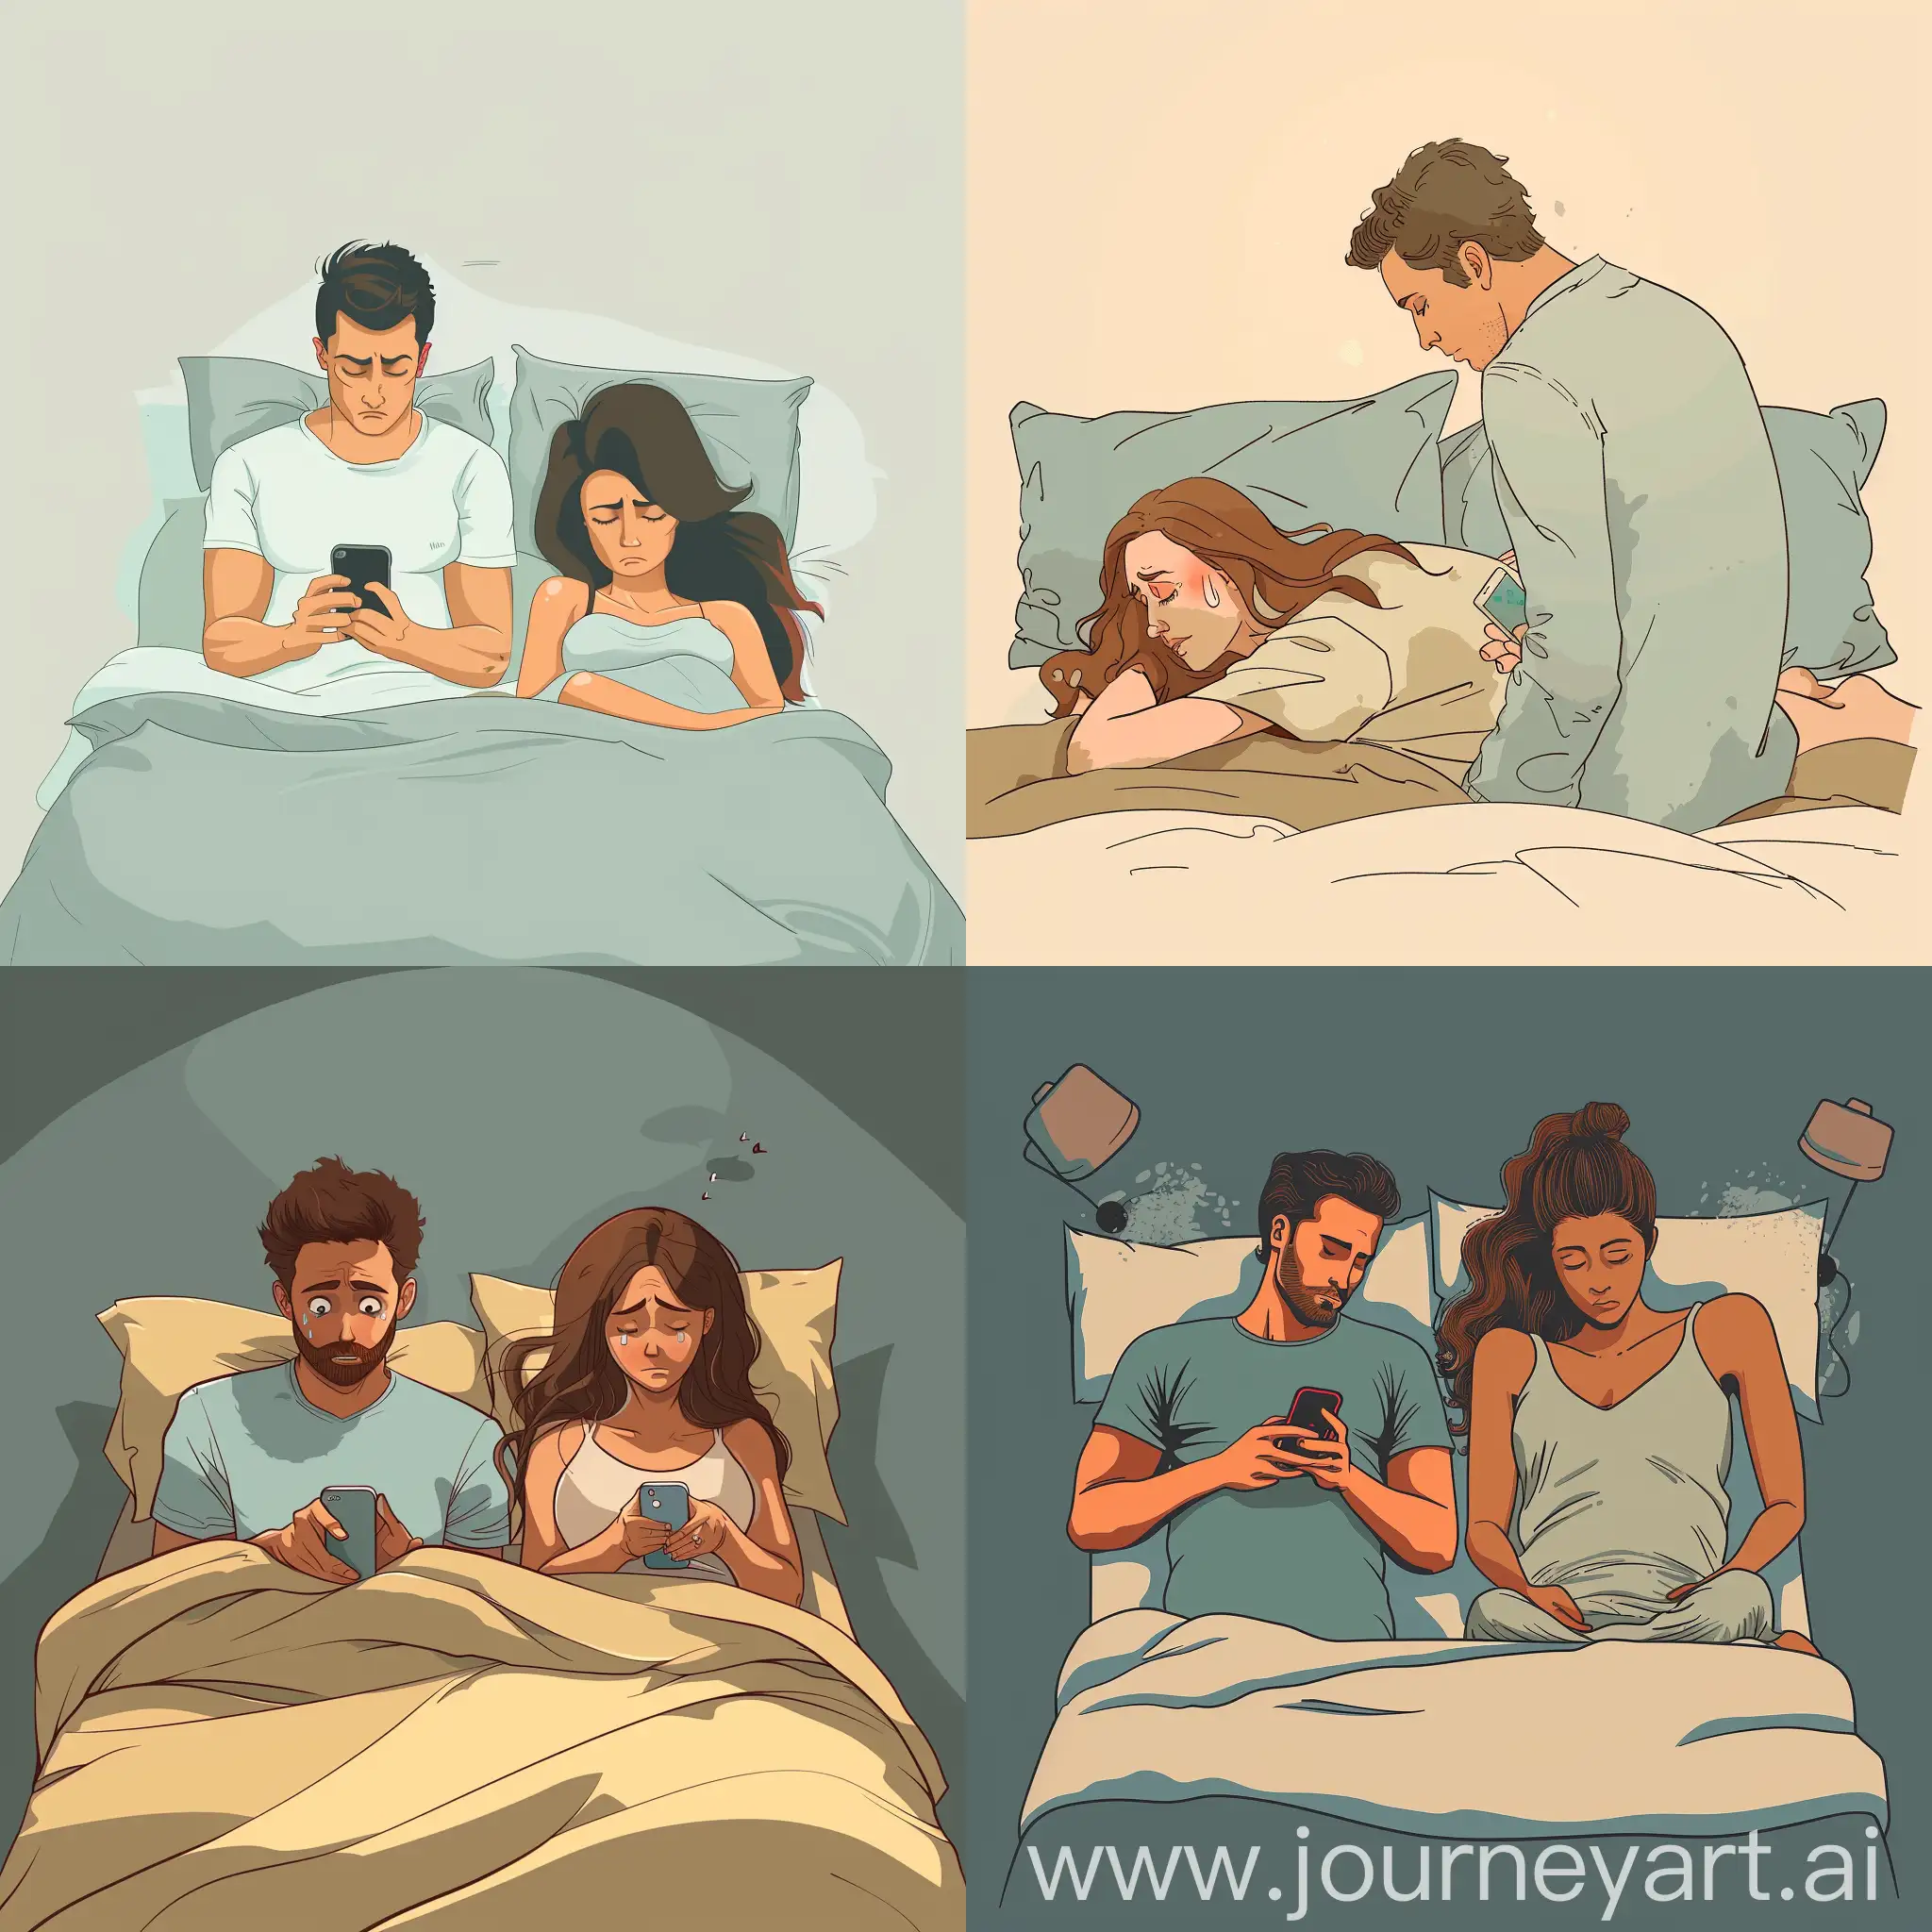 husband and wife are lying in bed, the husband is turned to one side and is looking at the mobile phone, and the wife is lying on her back and is sad that the husband is not paying attention to her but to the phone